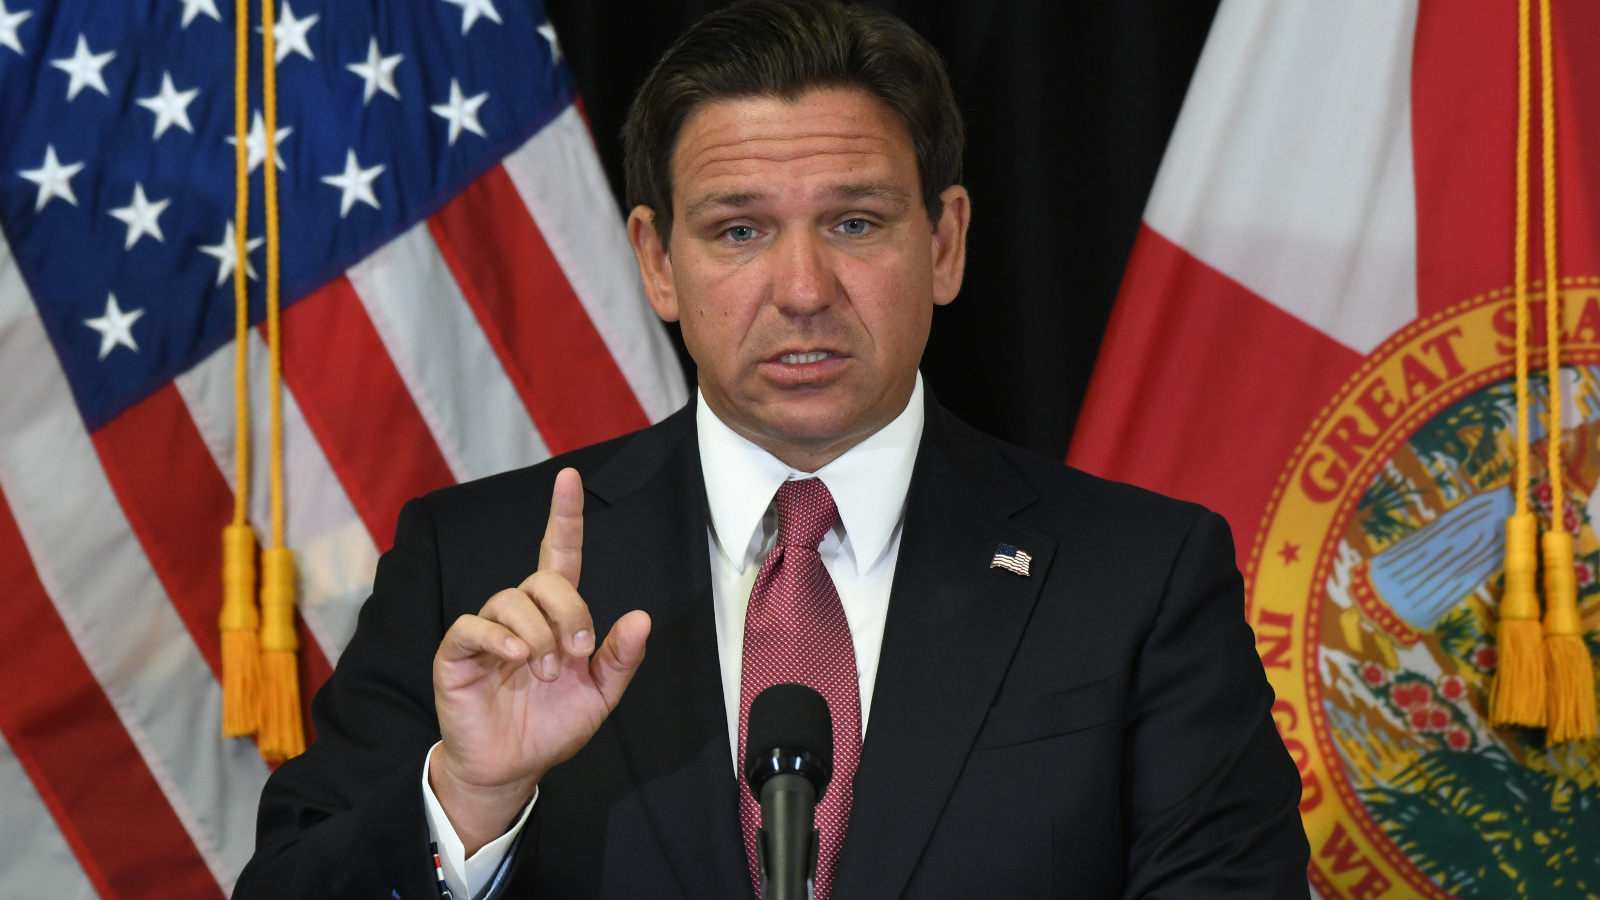 DeSantis says he’s ‘restoring sanity’ by erasing climate change from Florida laws